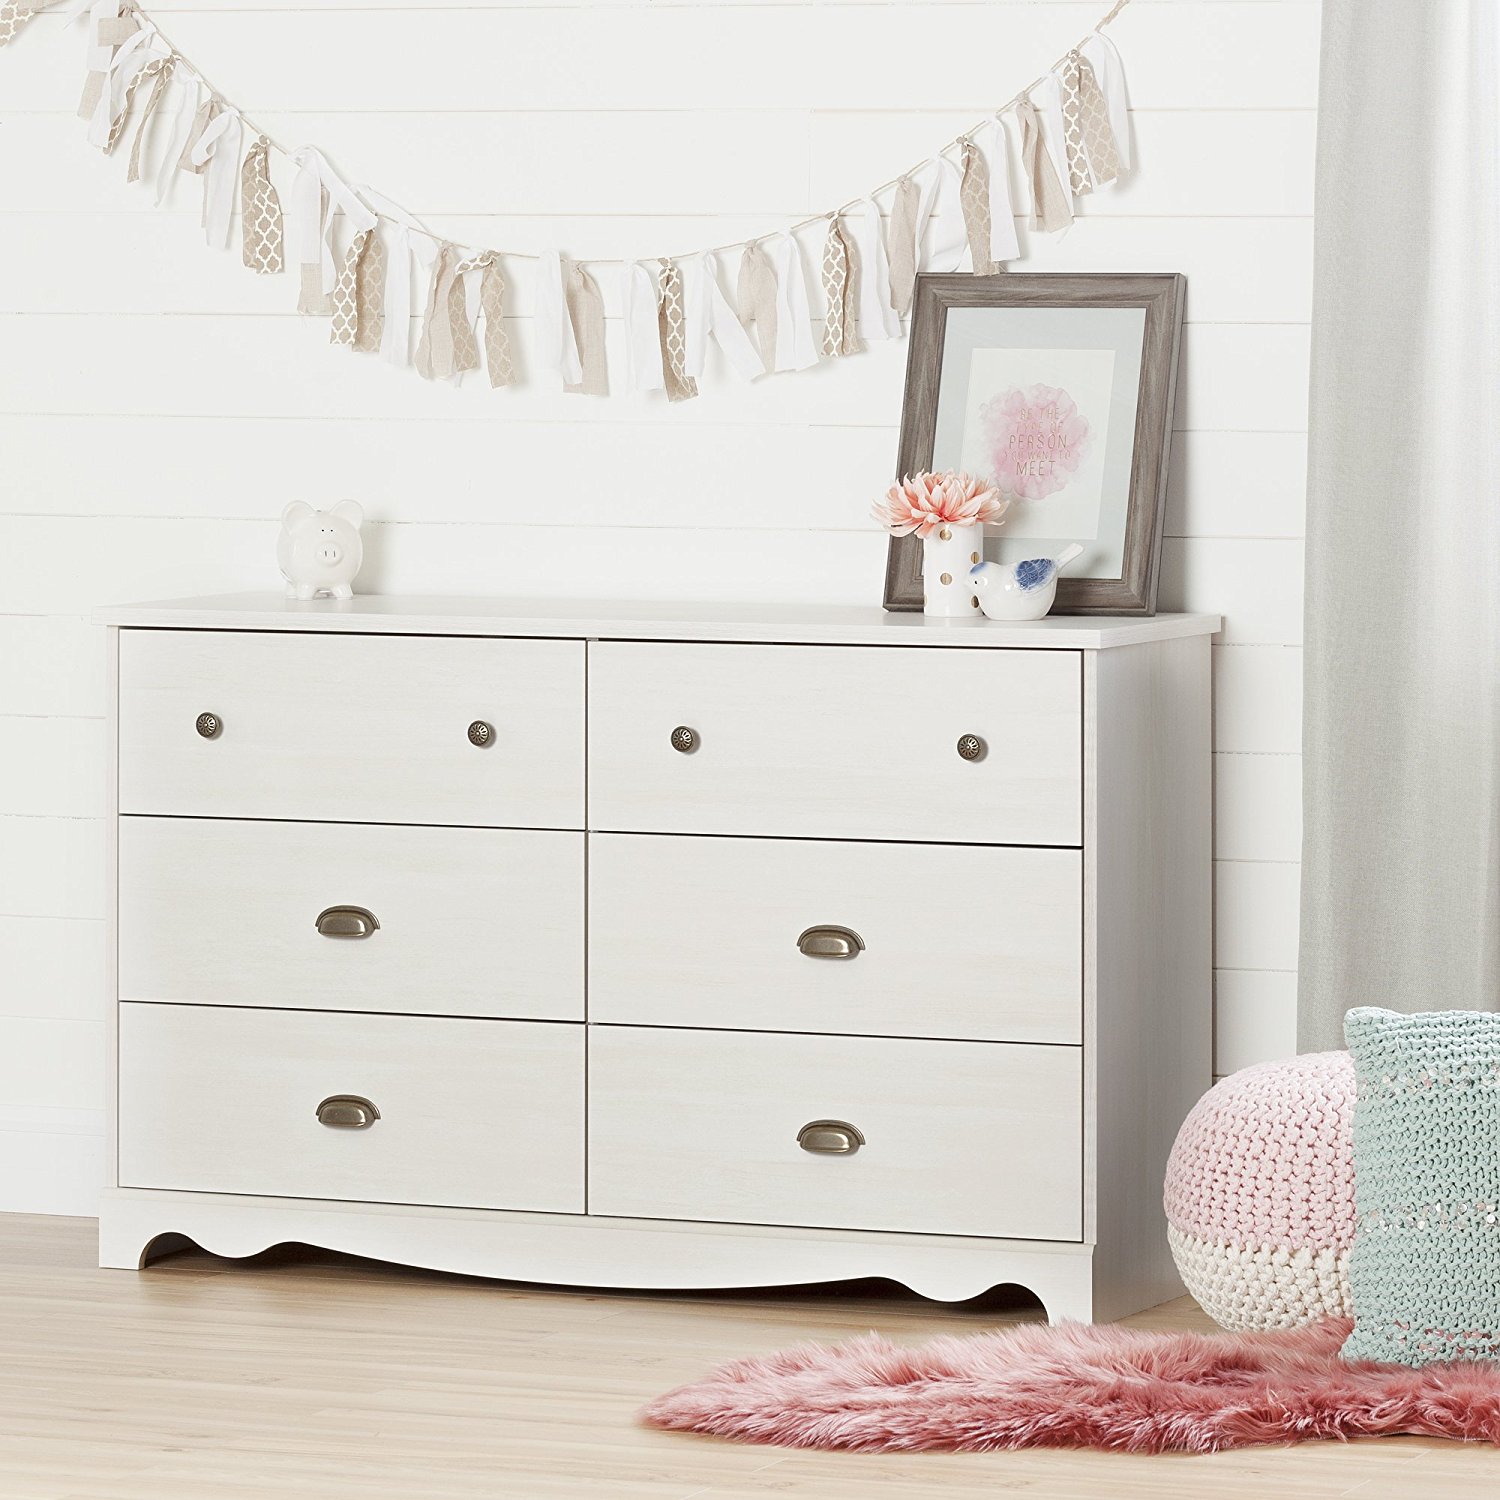 South Shore Caravell 6-Drawer Double Dresser, White Wash